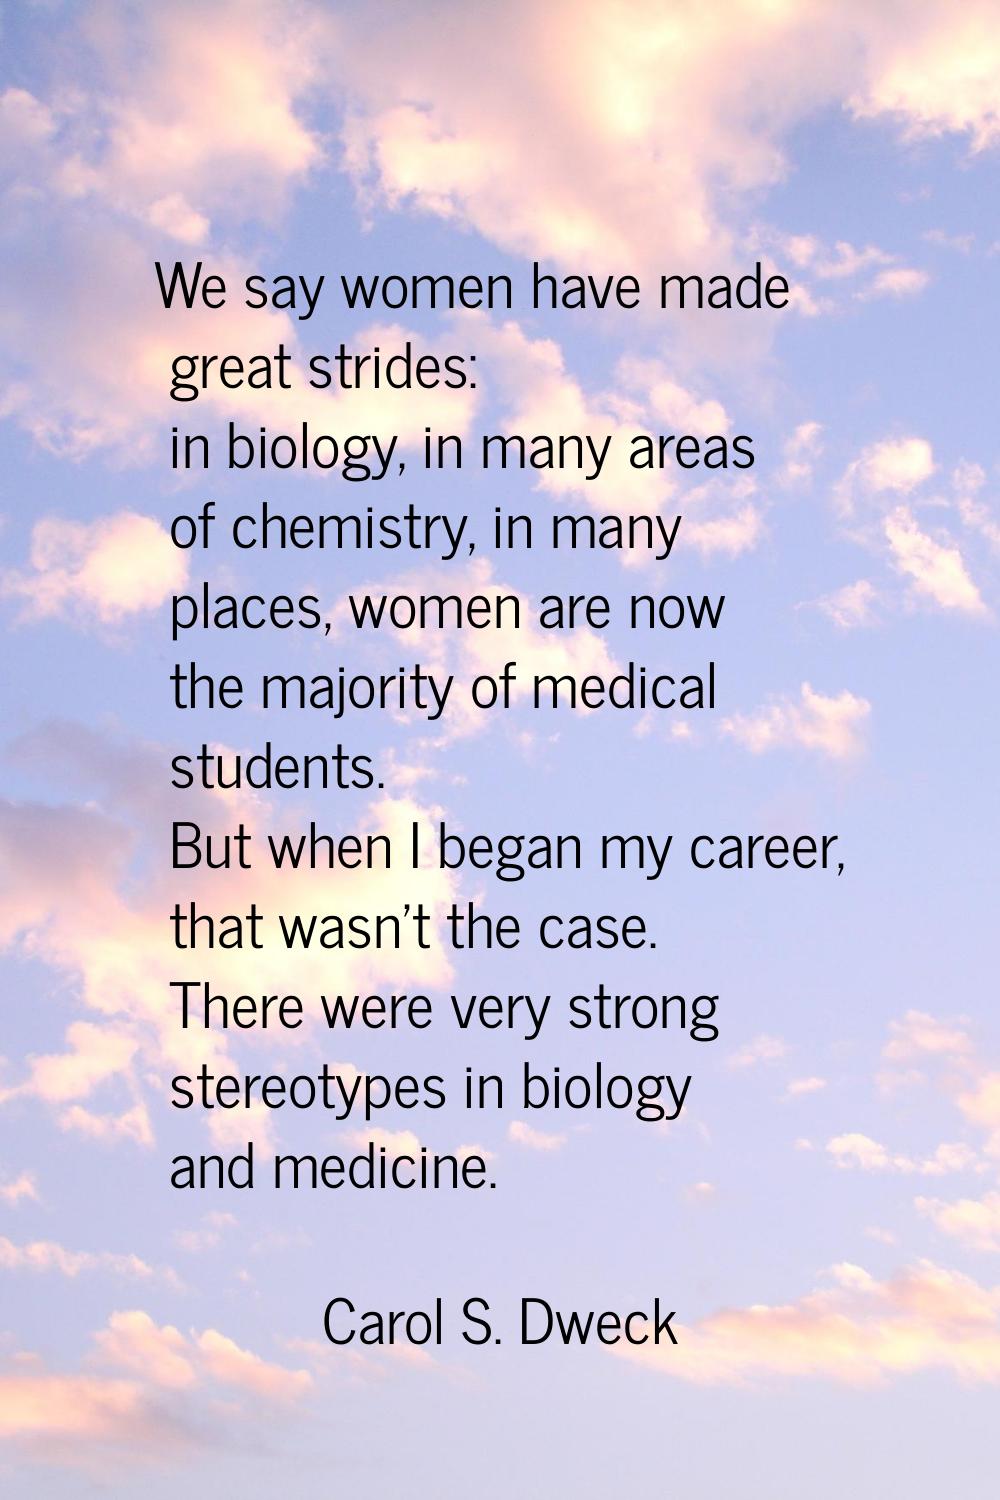 We say women have made great strides: in biology, in many areas of chemistry, in many places, women